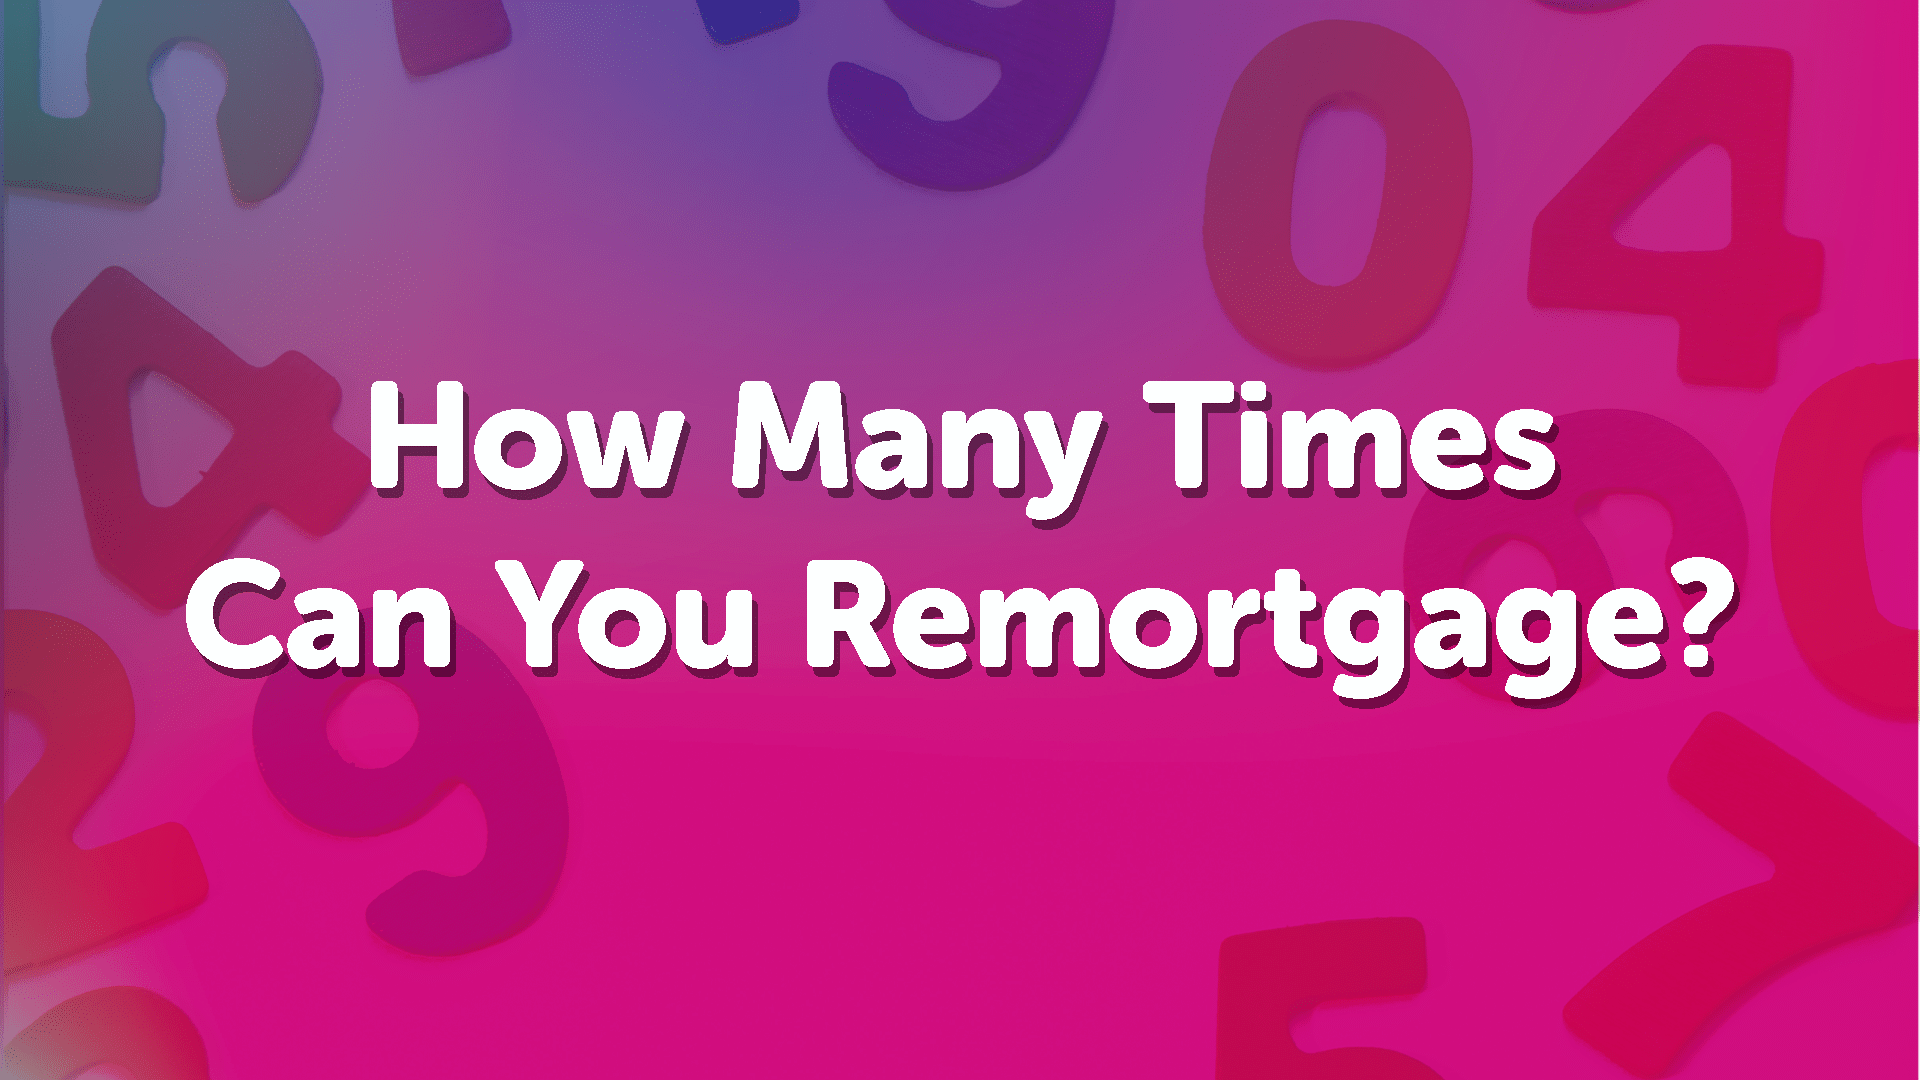 There is no limit on the number of times you can remortgage your property, but most people do it when their fixed-rate mortgage period ends.